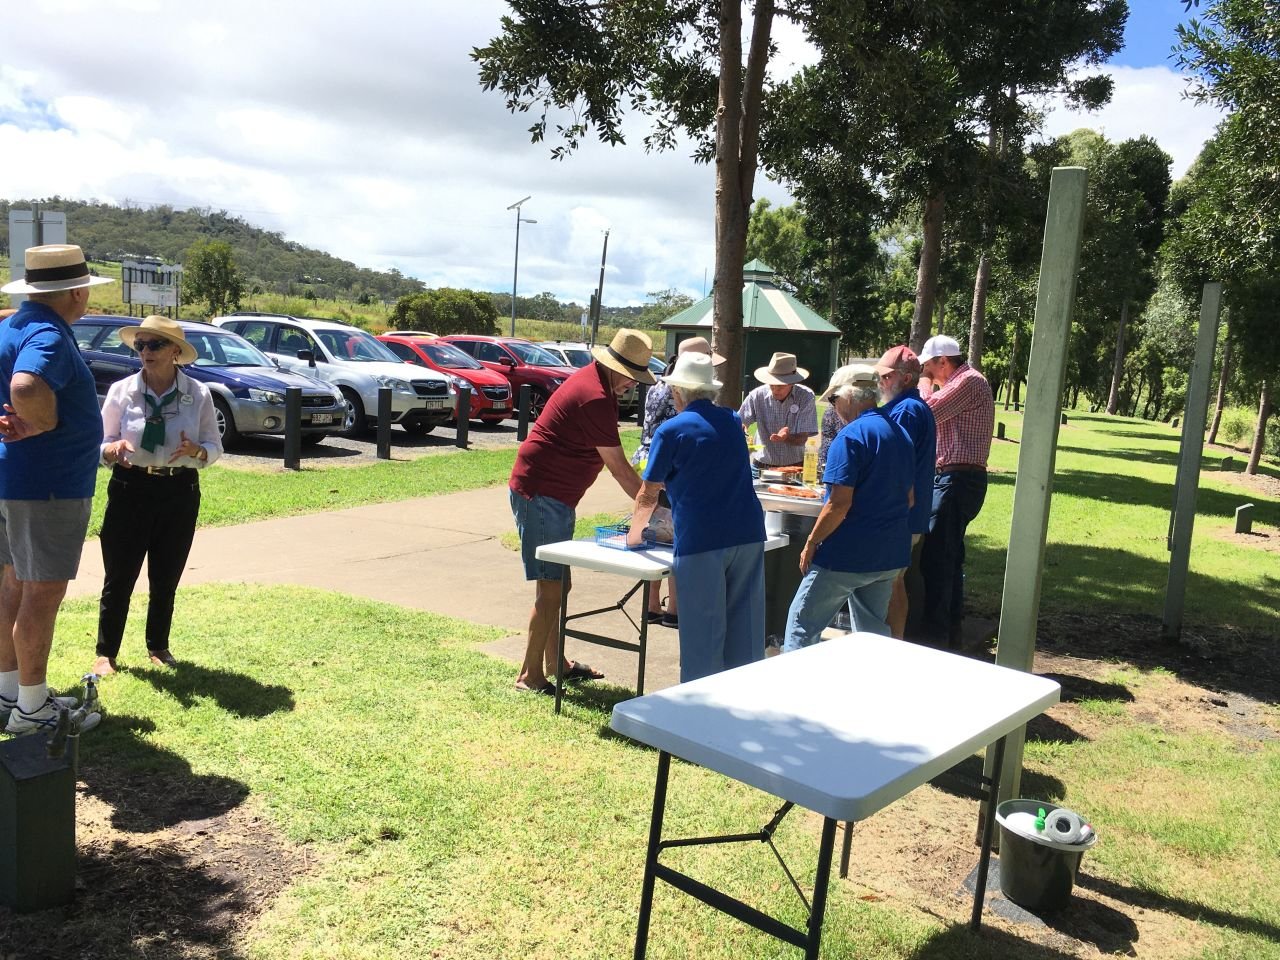 Sizzling the sausages at Toowoomba's Federation Park - March 2022.